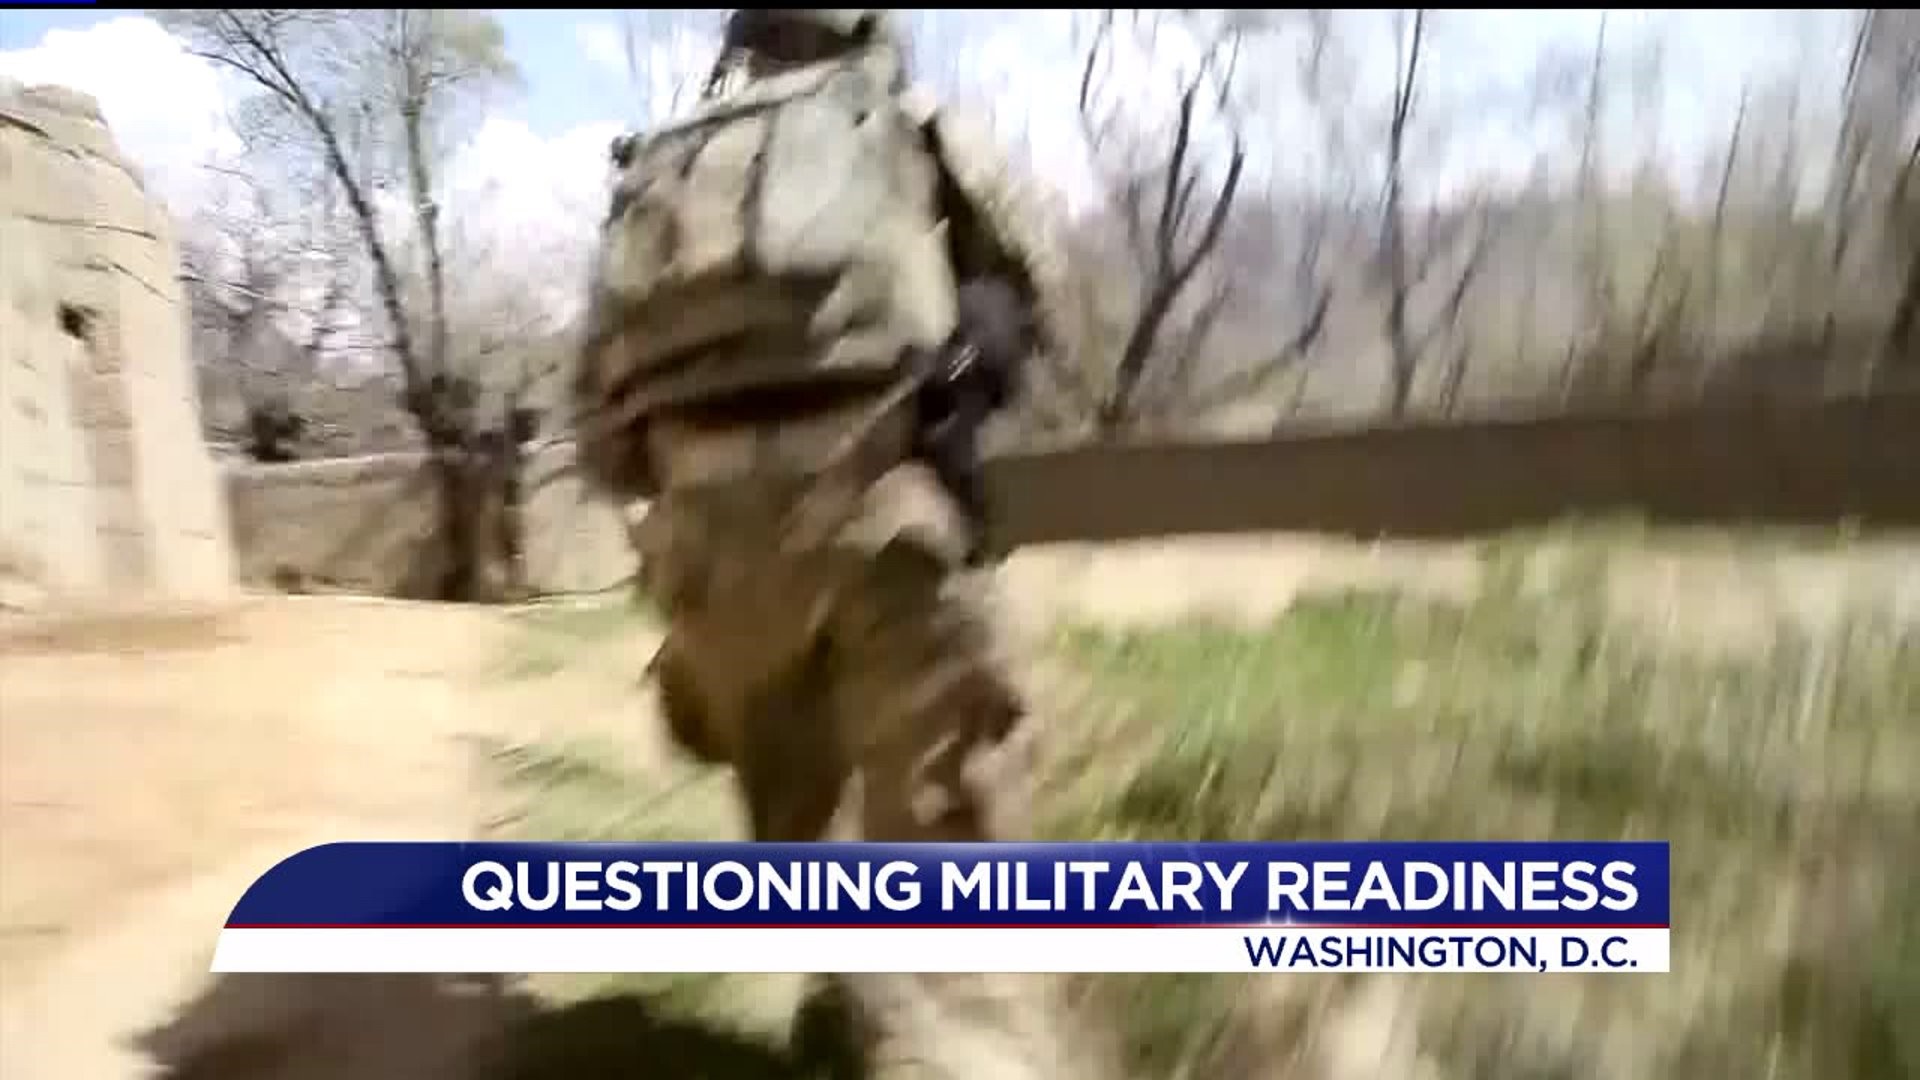 MILITARY QUESTIONS